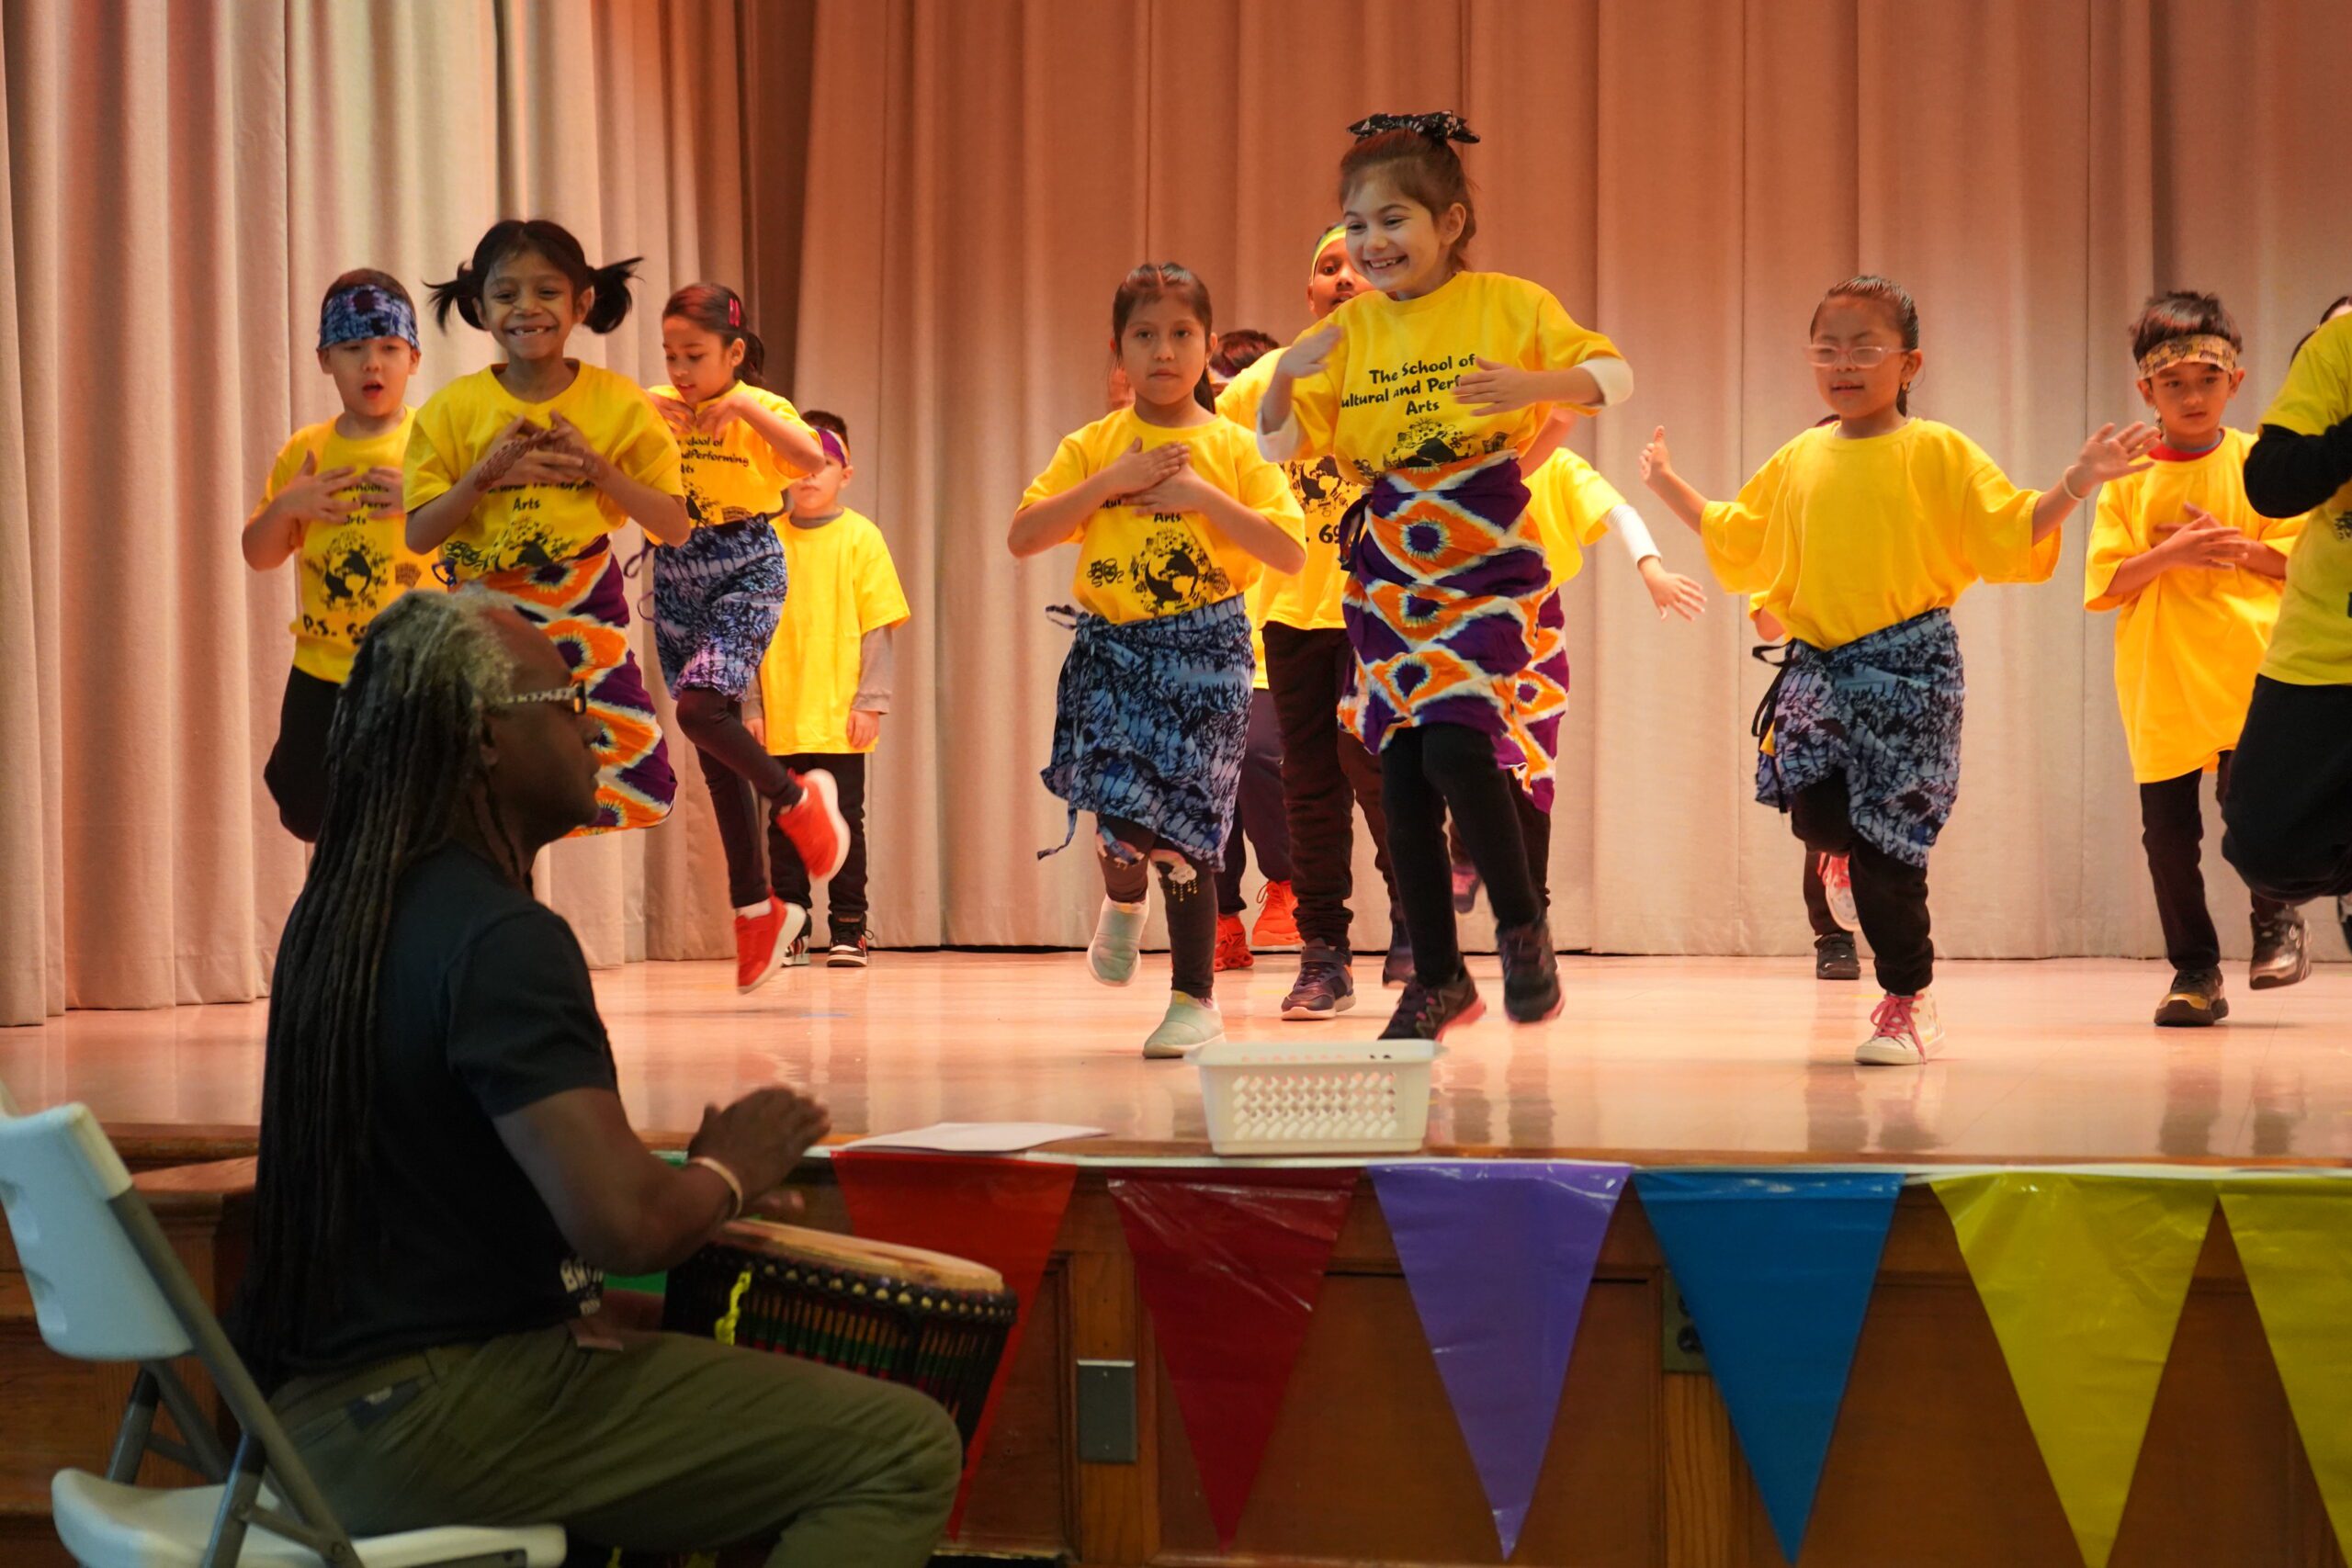 Students perform for their culminating show at PS69 while Yahaya drums!